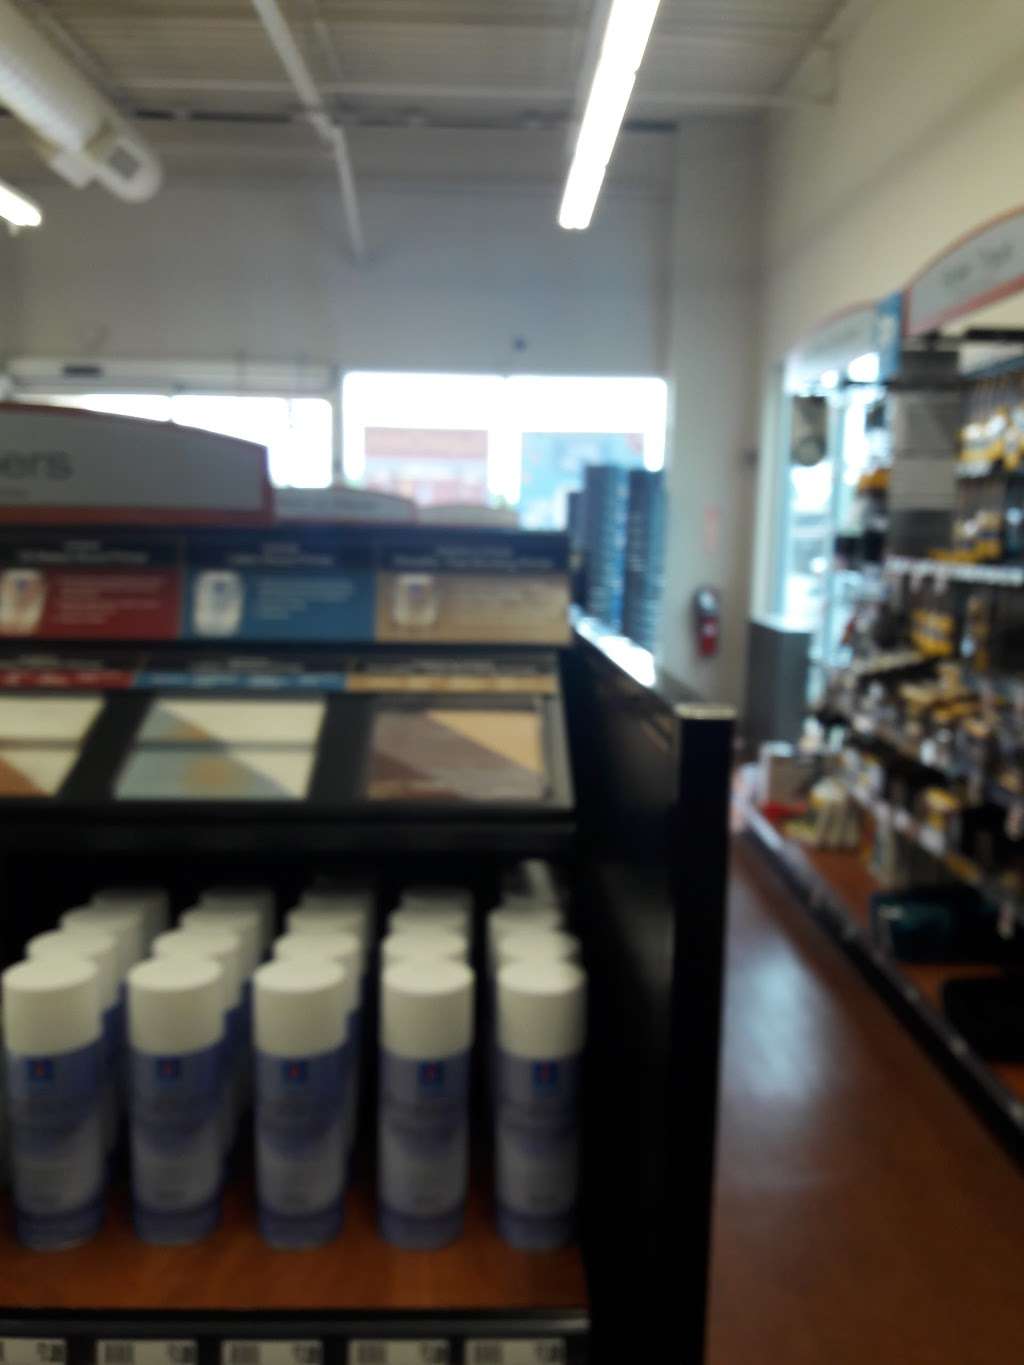 Sherwin-Williams Paint Store | 4034 Charlotte Hwy #101, Lake Wylie, SC 29710, USA | Phone: (803) 831-8083